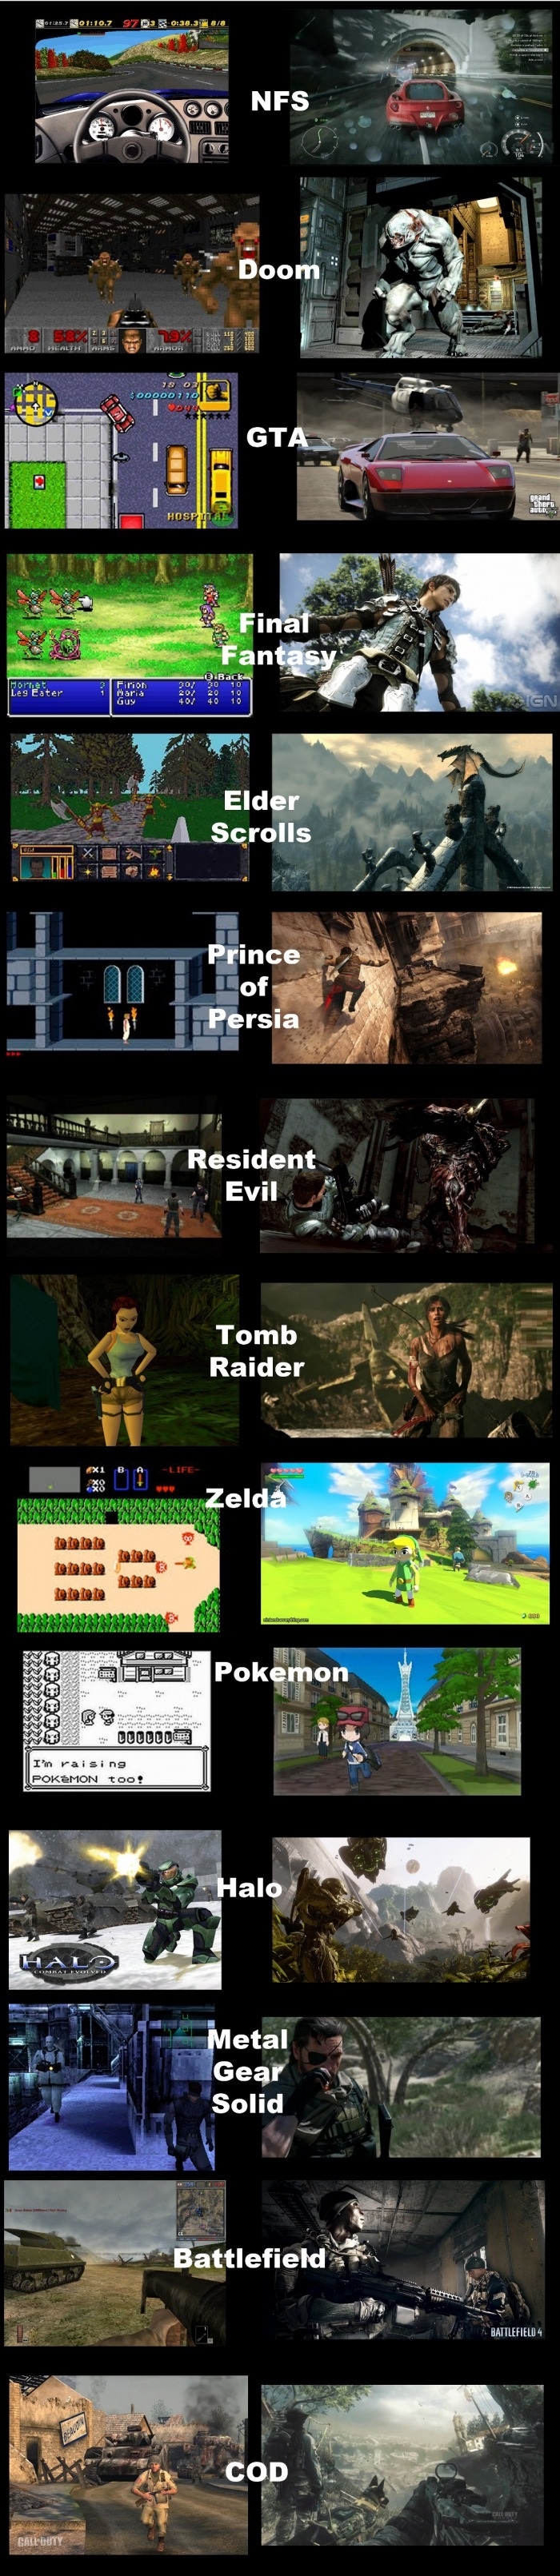 Games through the years